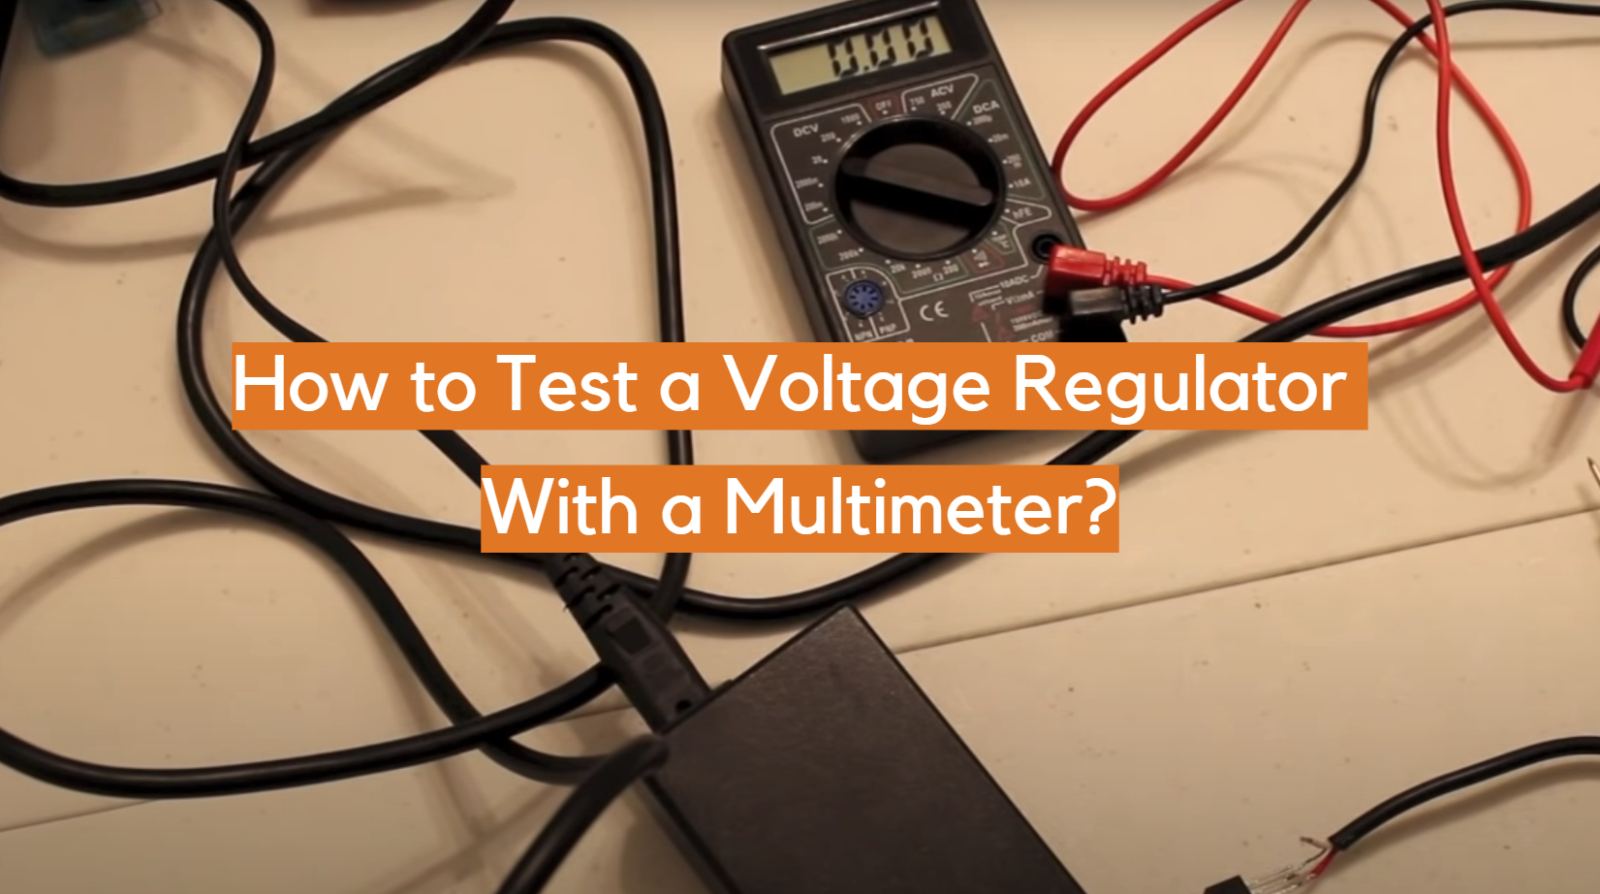 How to Test a Voltage Regulator With a Multimeter?